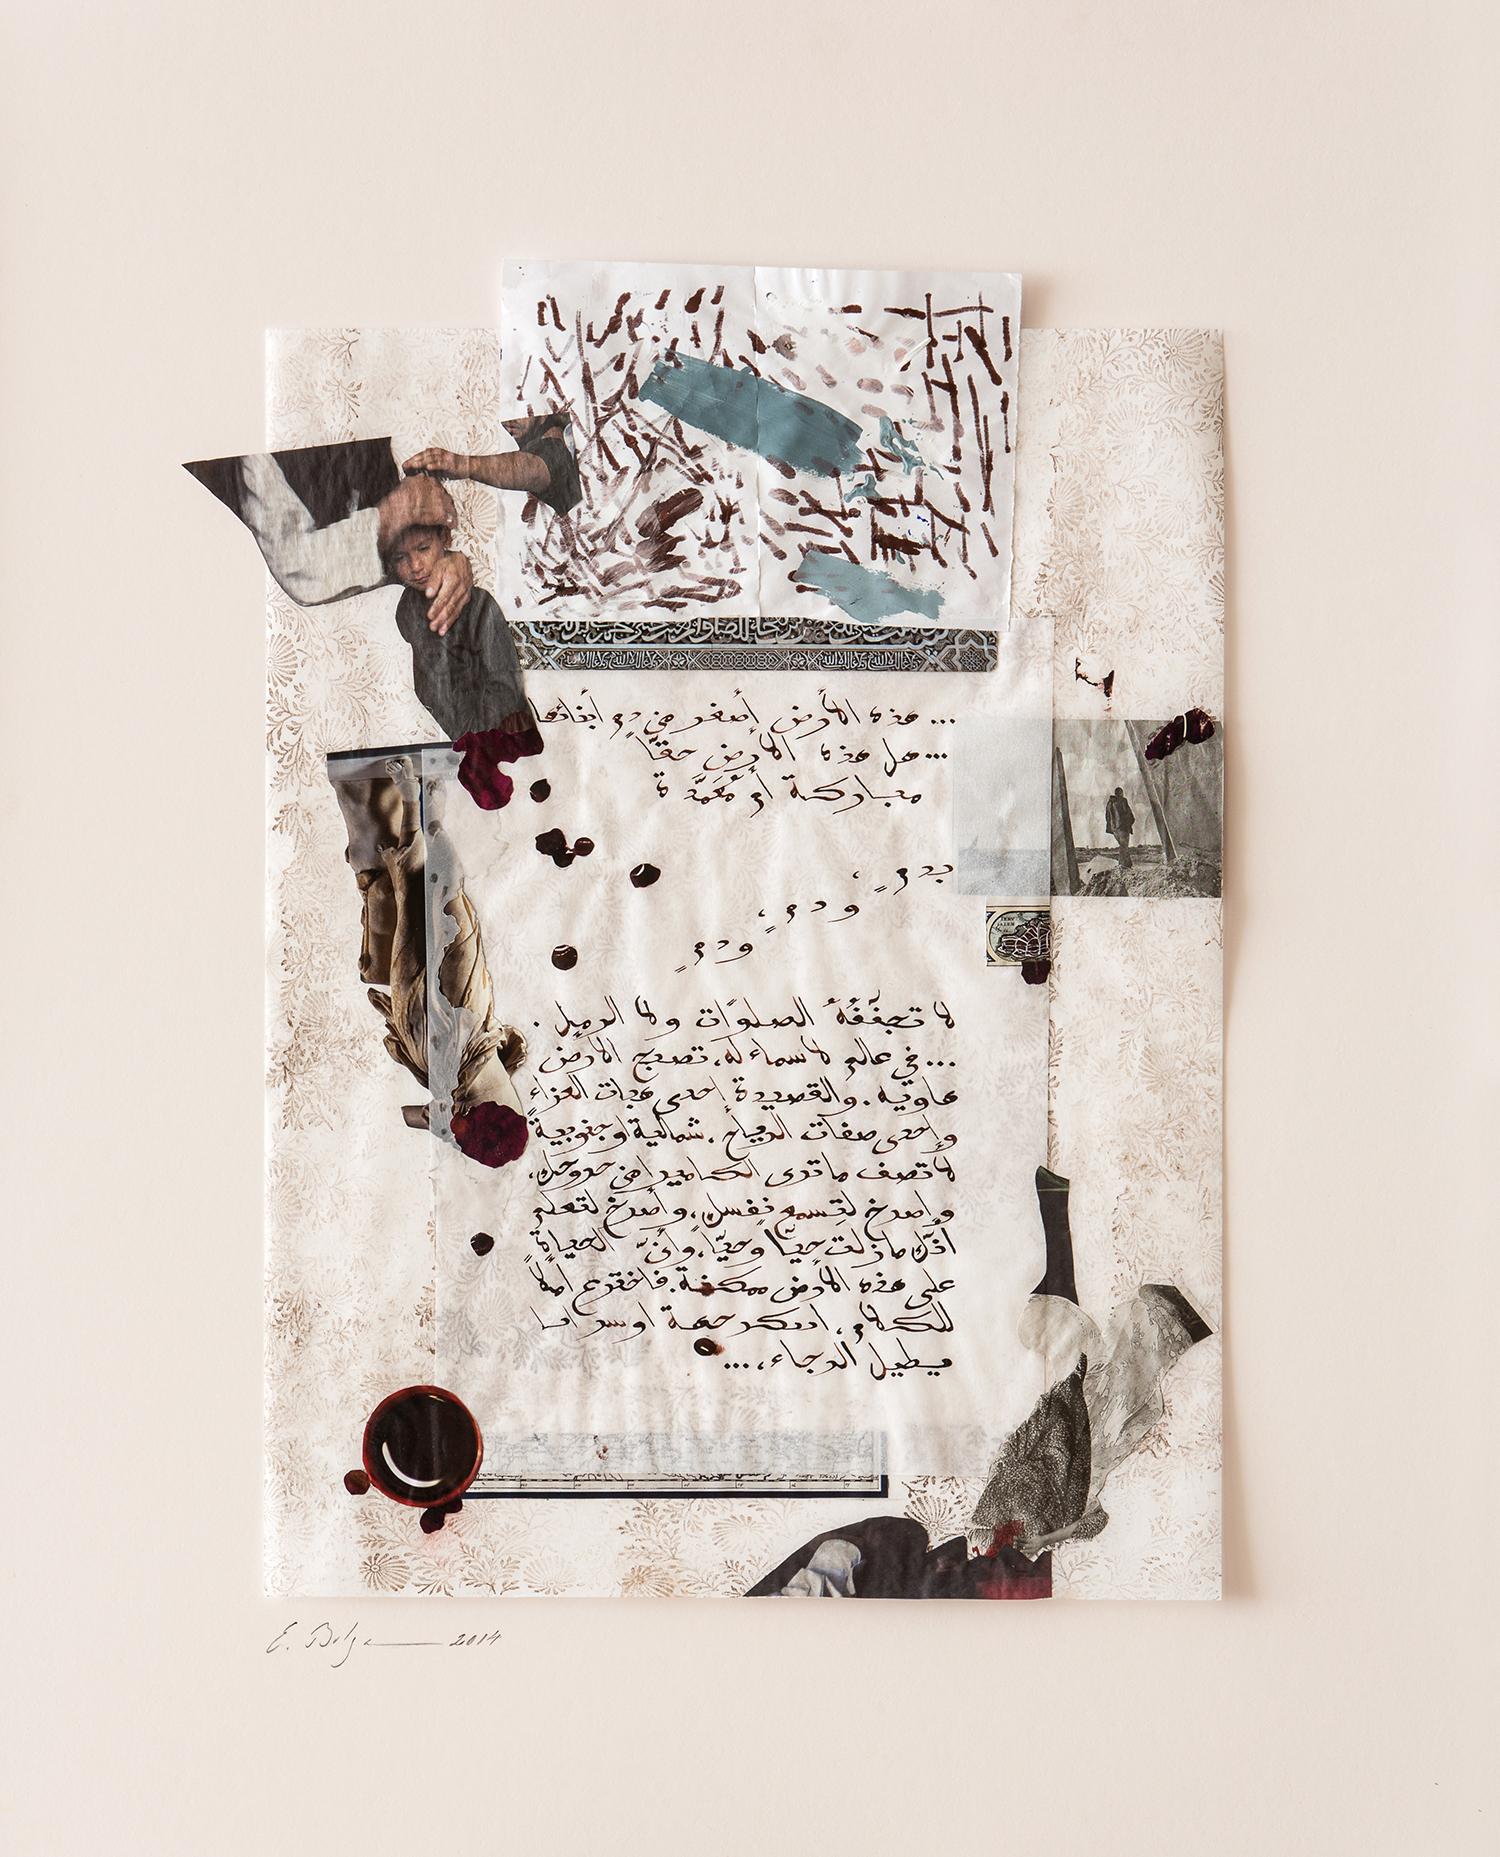   Shattered Dreams   Private Collection London, United Kingdom  Paper, Iranian ink, gesso and tempera on hand stamped paper 2014 